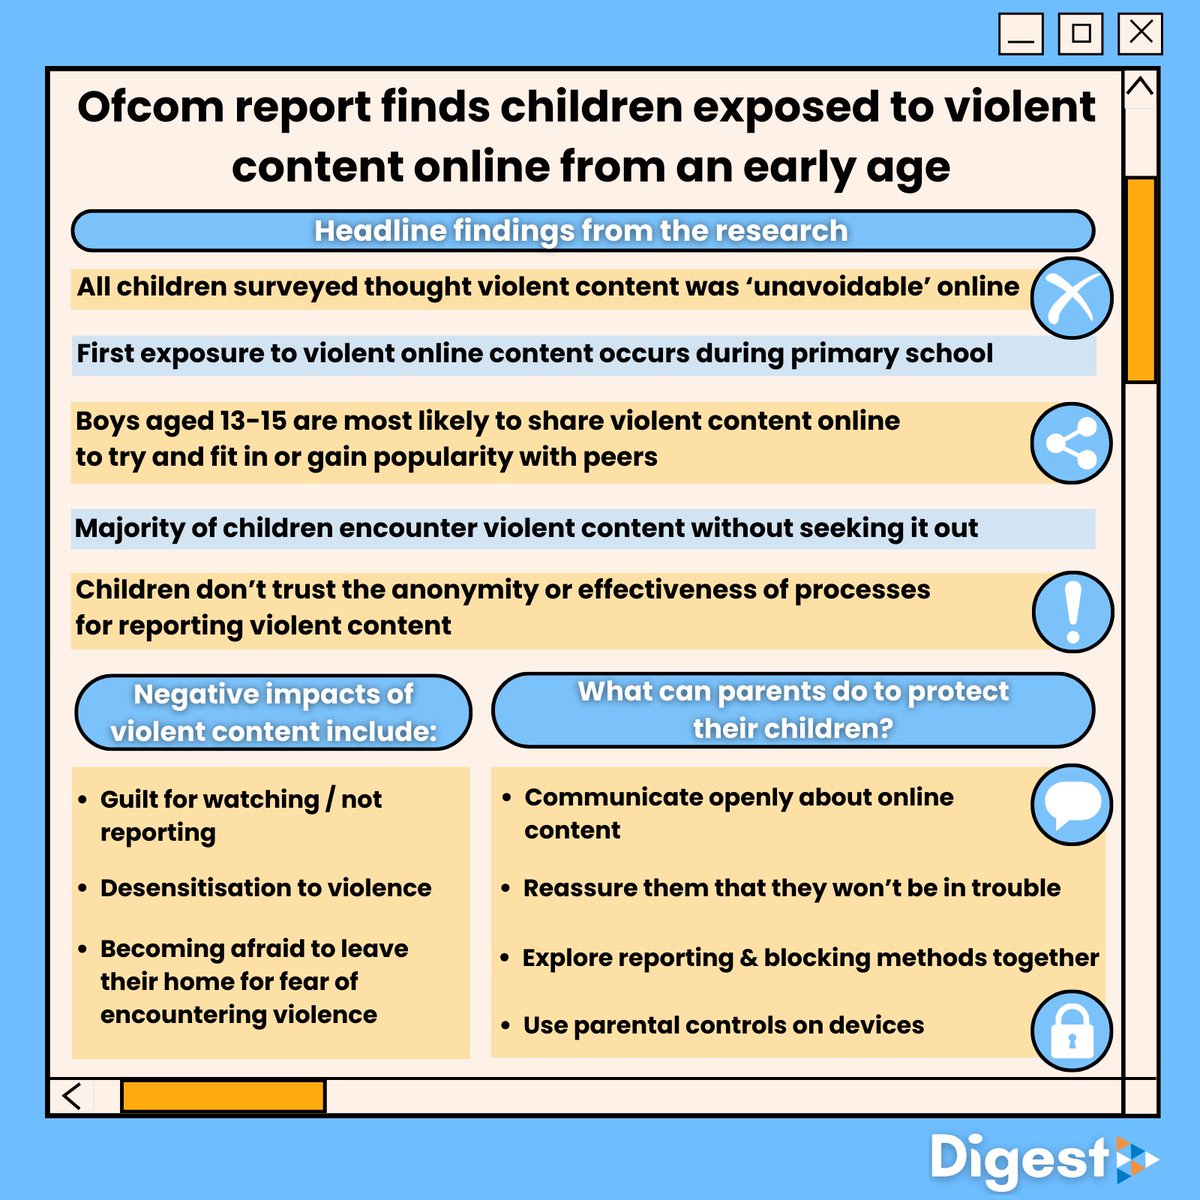 A report into exposure to violent content online from @Ofcom suggests children are seeing and sharing it from an early age. Read the headline findings below and follow @TwinklDigest for more advice for parents. #OnlineSafety